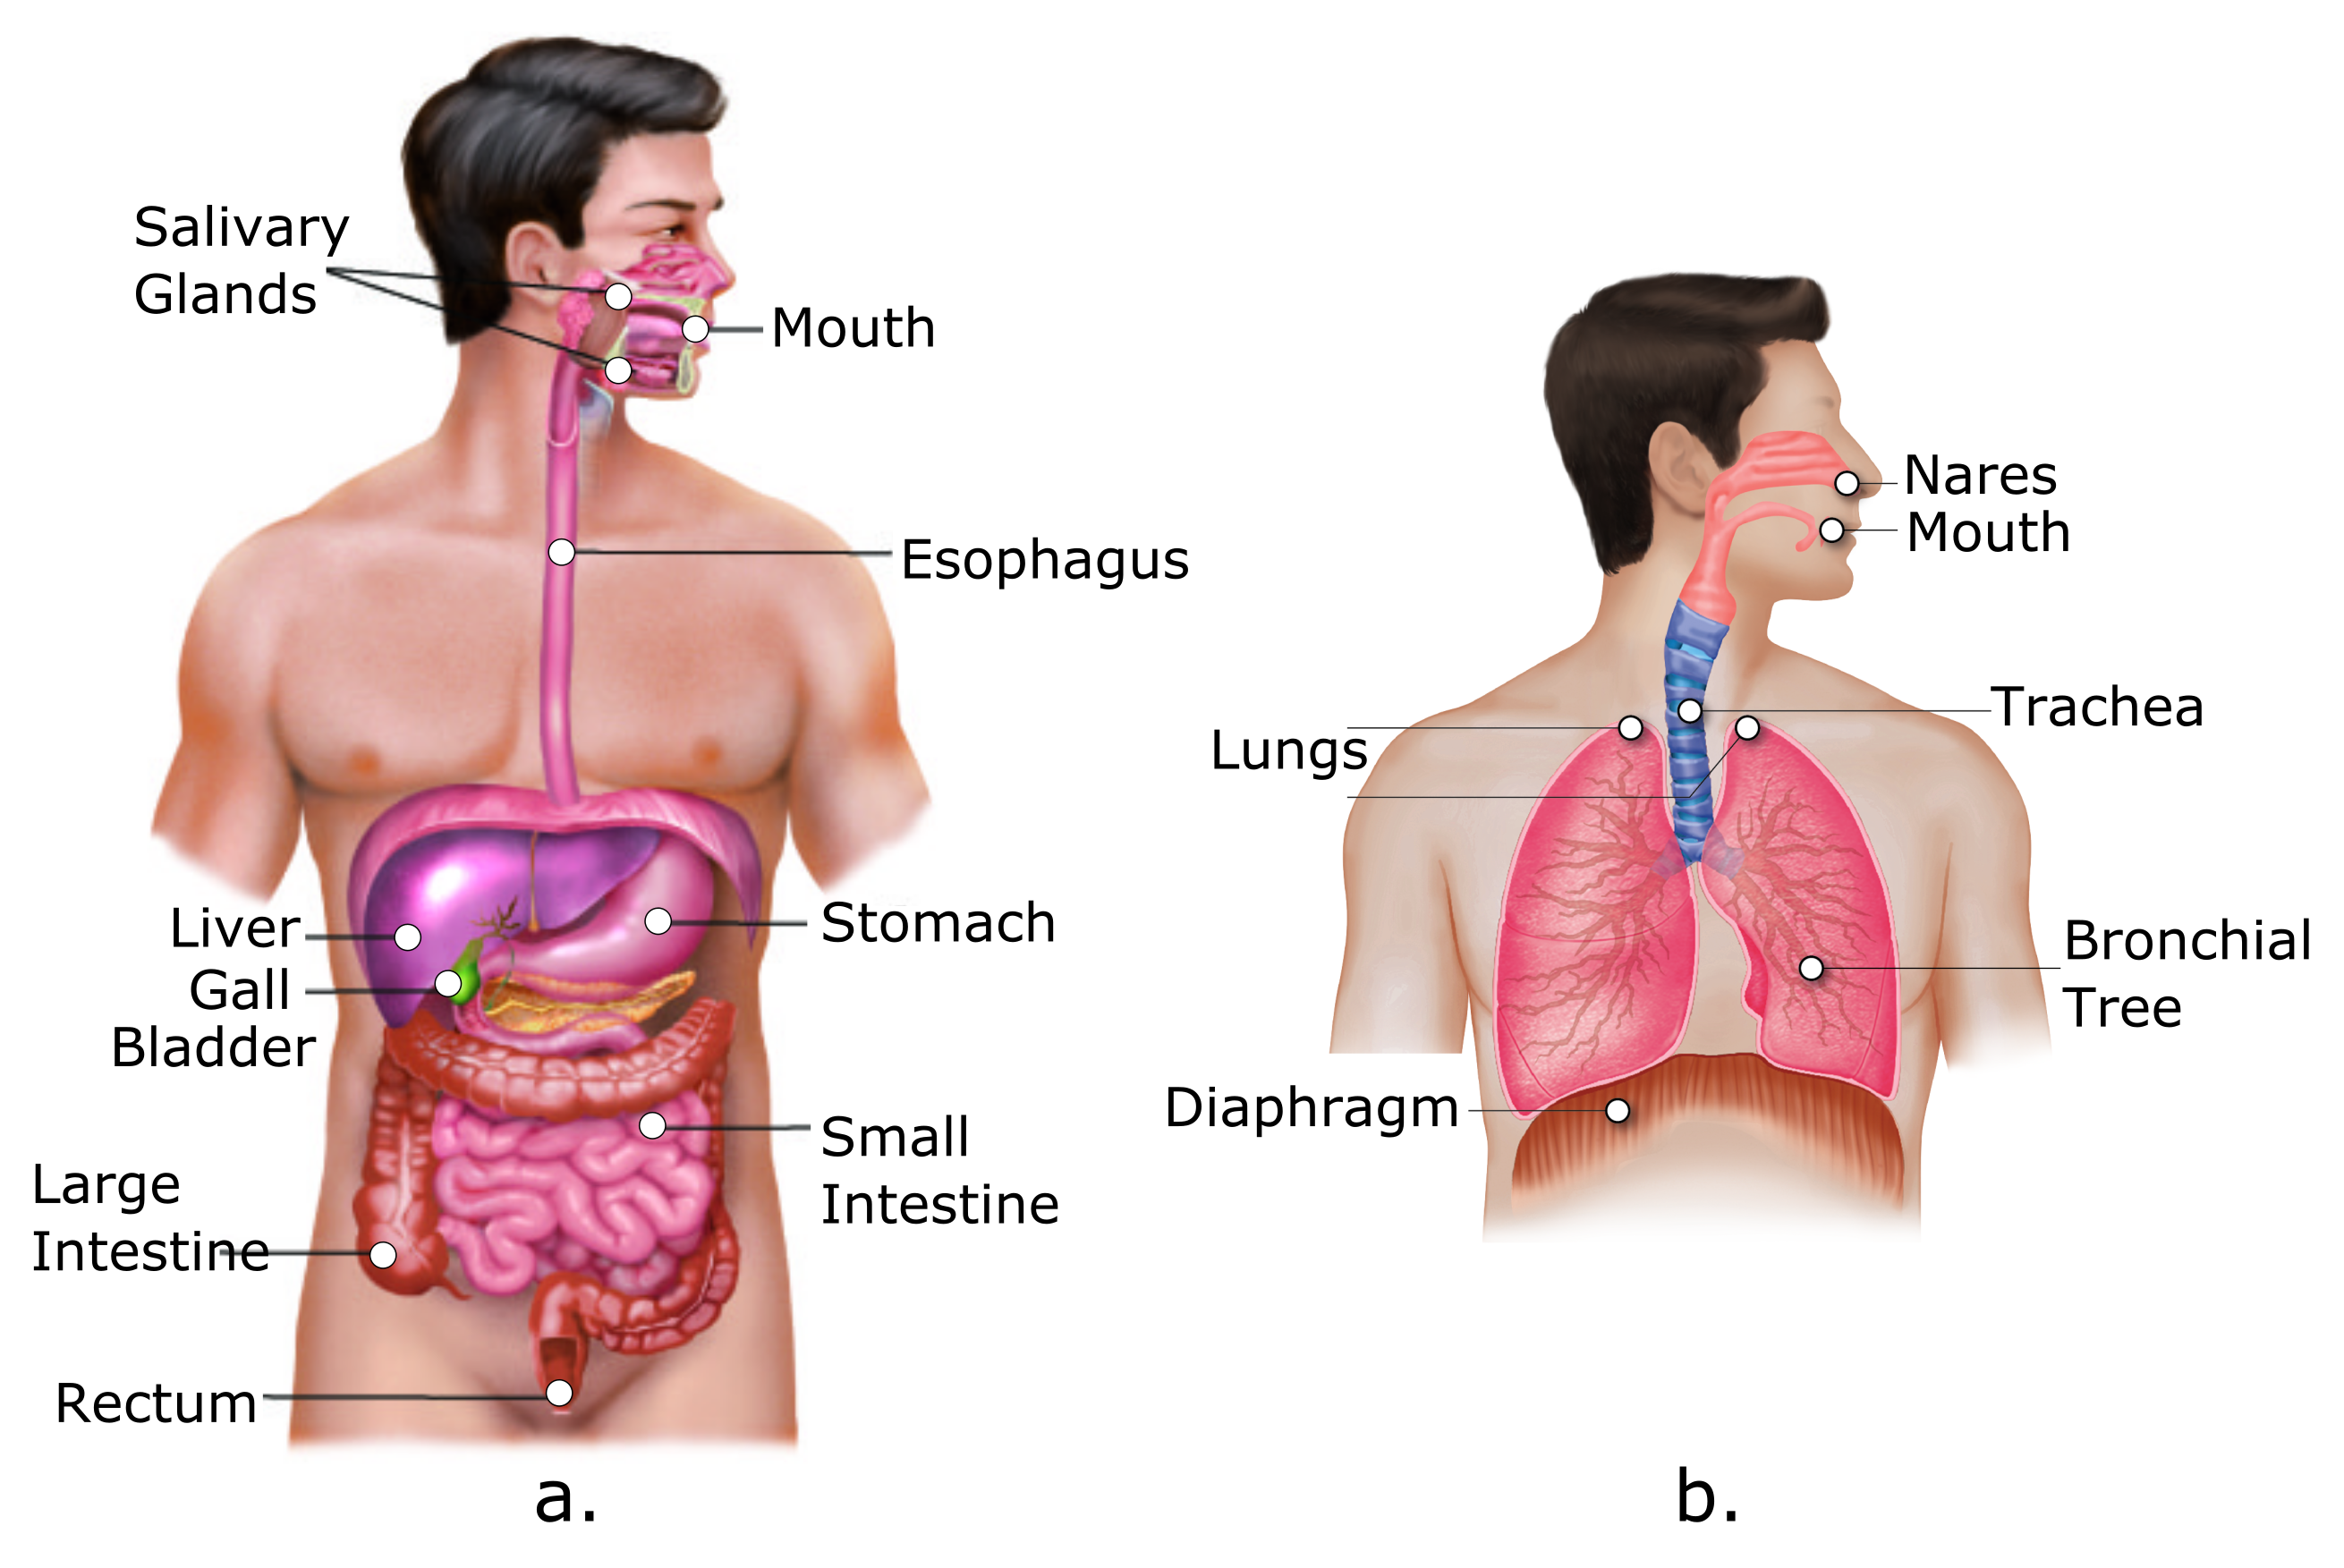 Diagram of the Digestive and Respiratory Systems